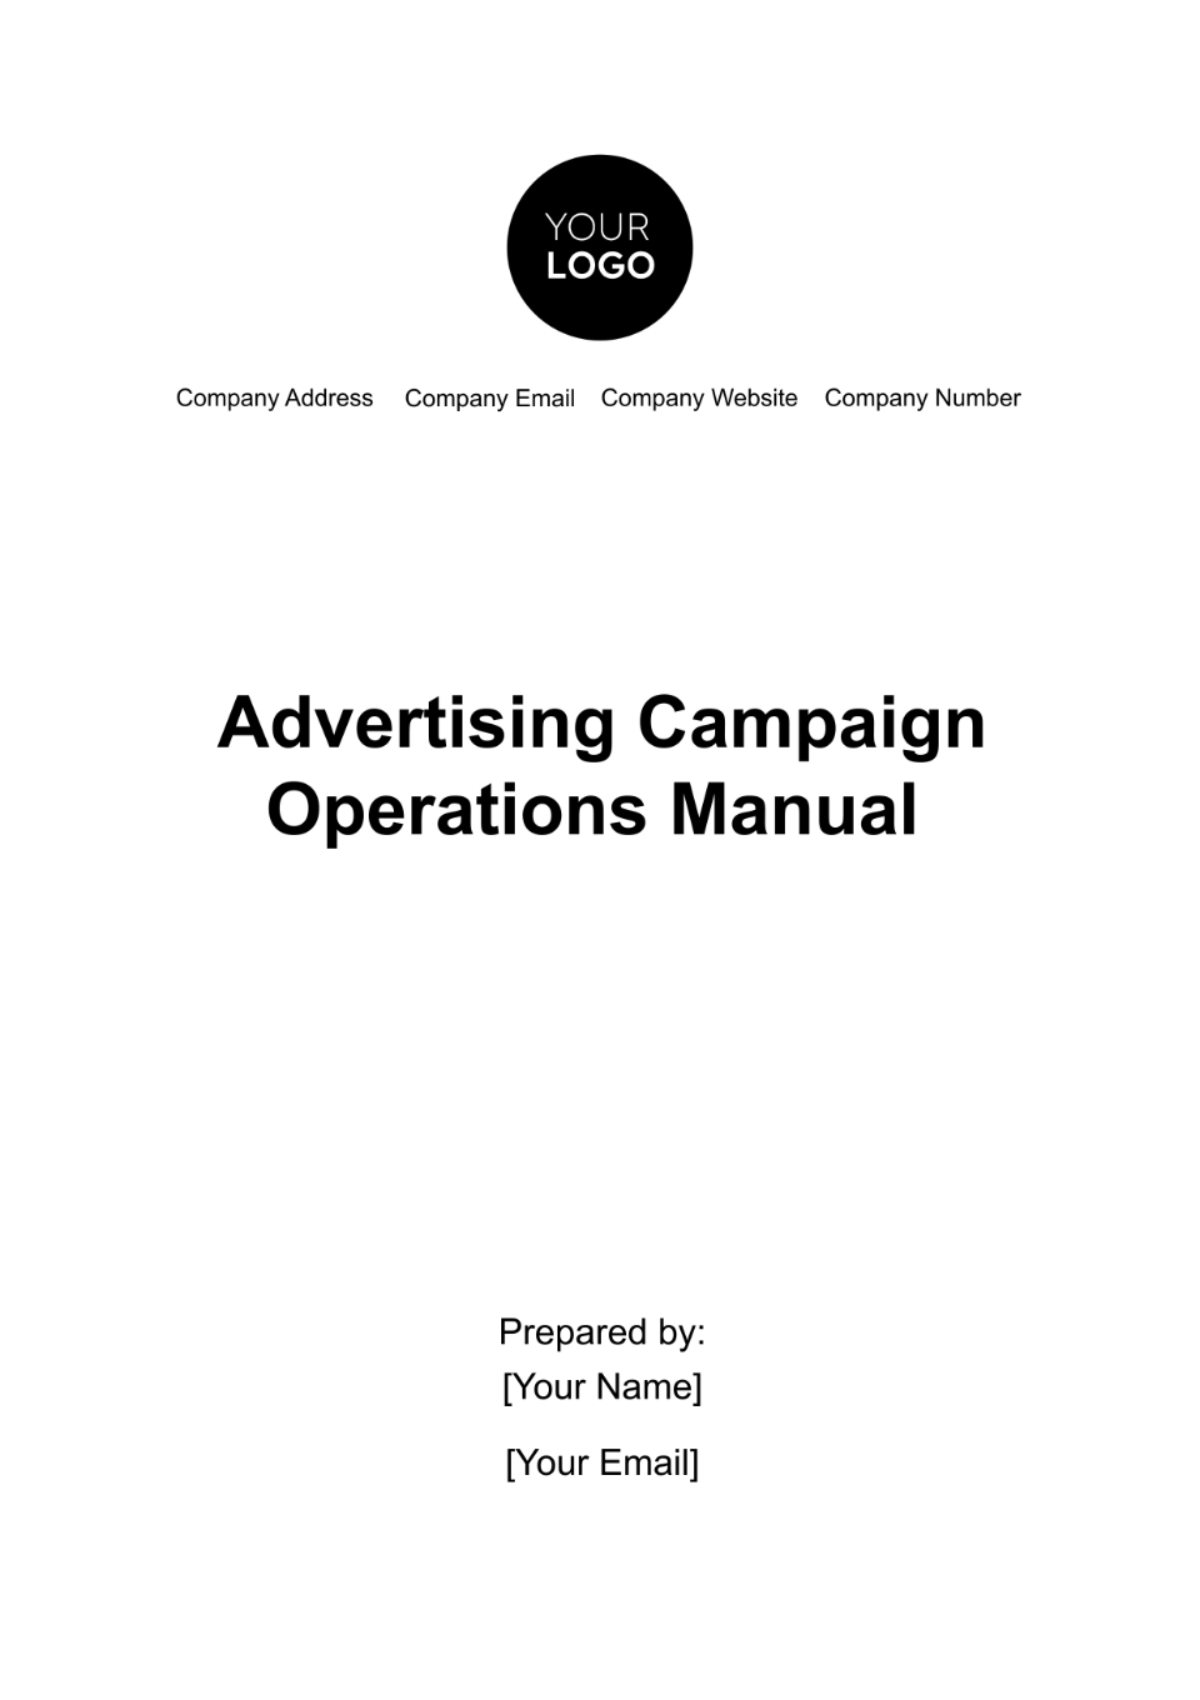 Advertising Campaign Operations Manual Template